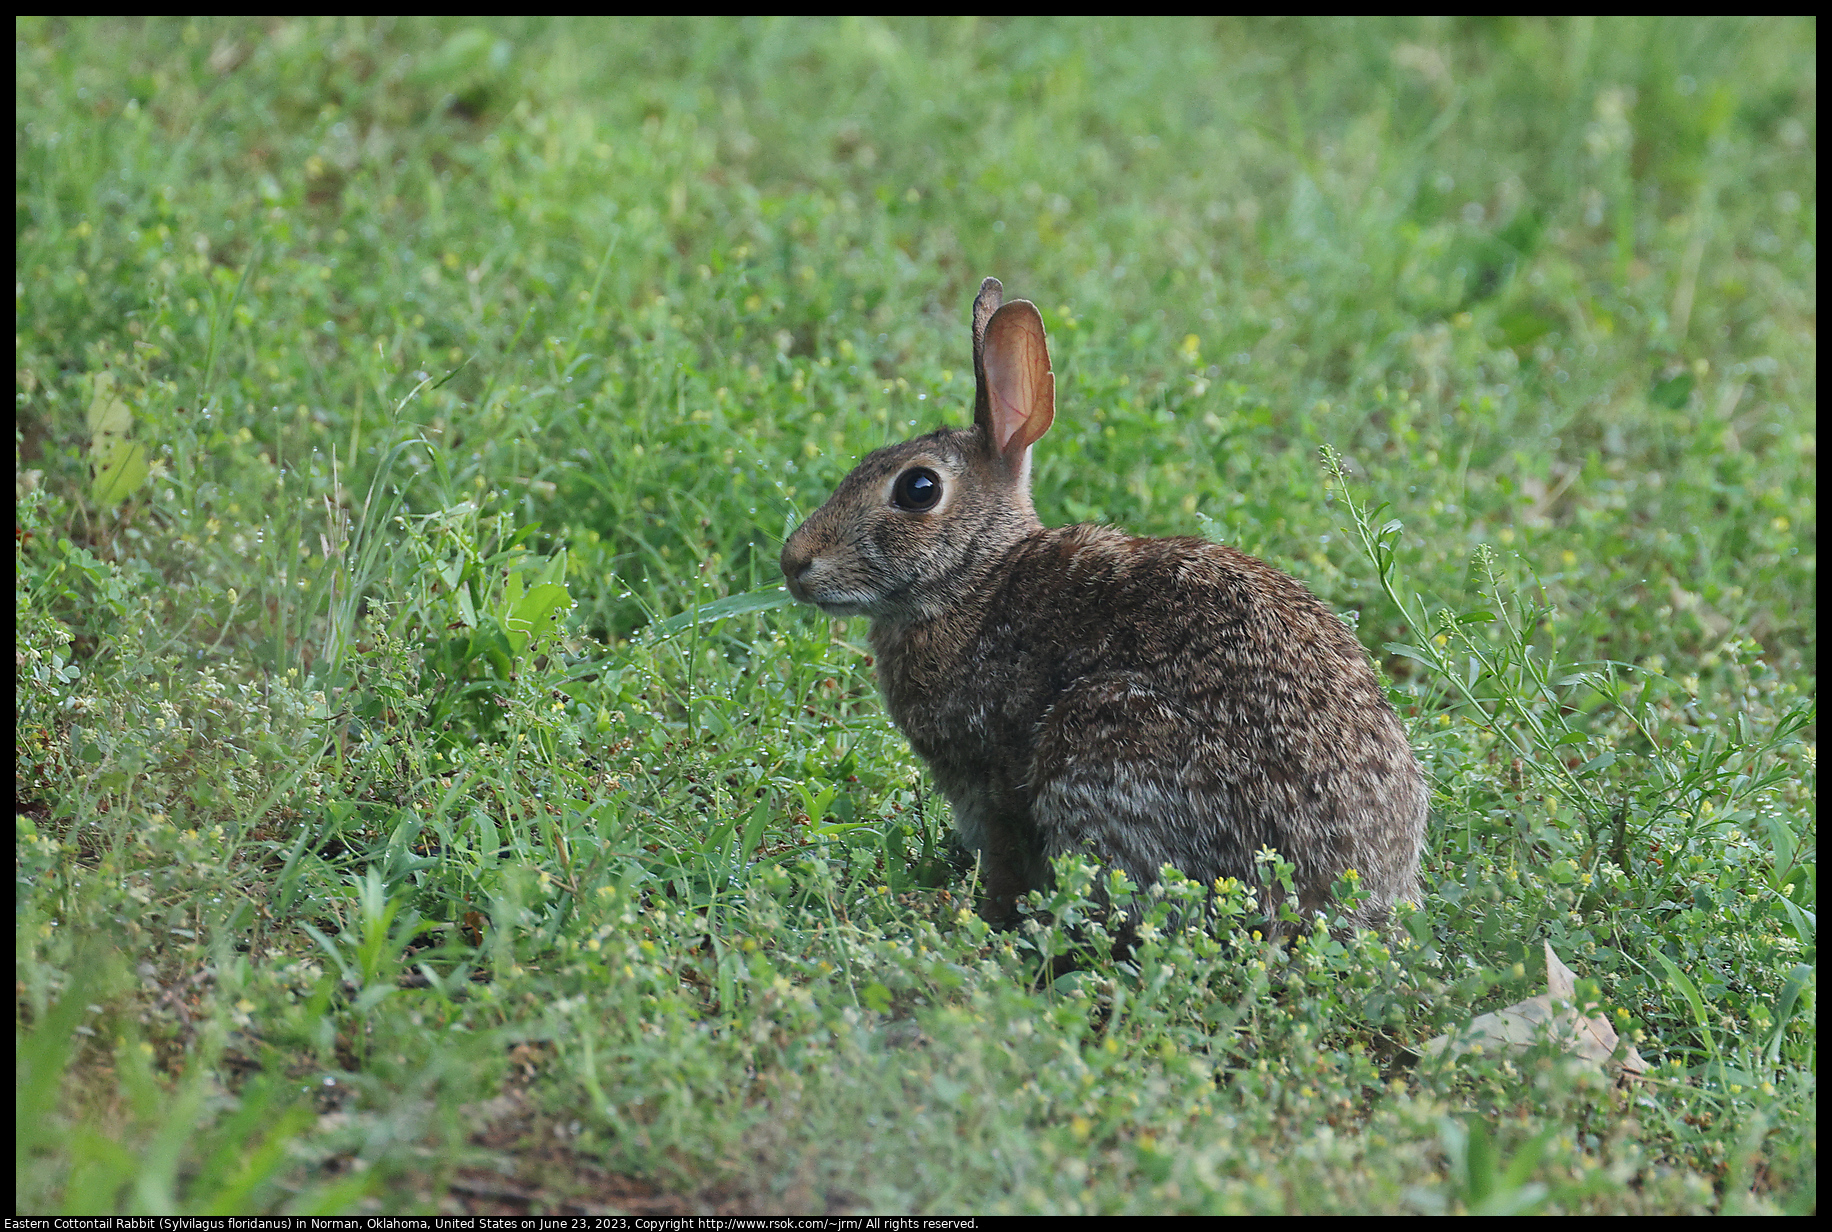 Eastern Cottontail Rabbit (Sylvilagus floridanus) in Norman, Oklahoma, United States on June 23, 2023